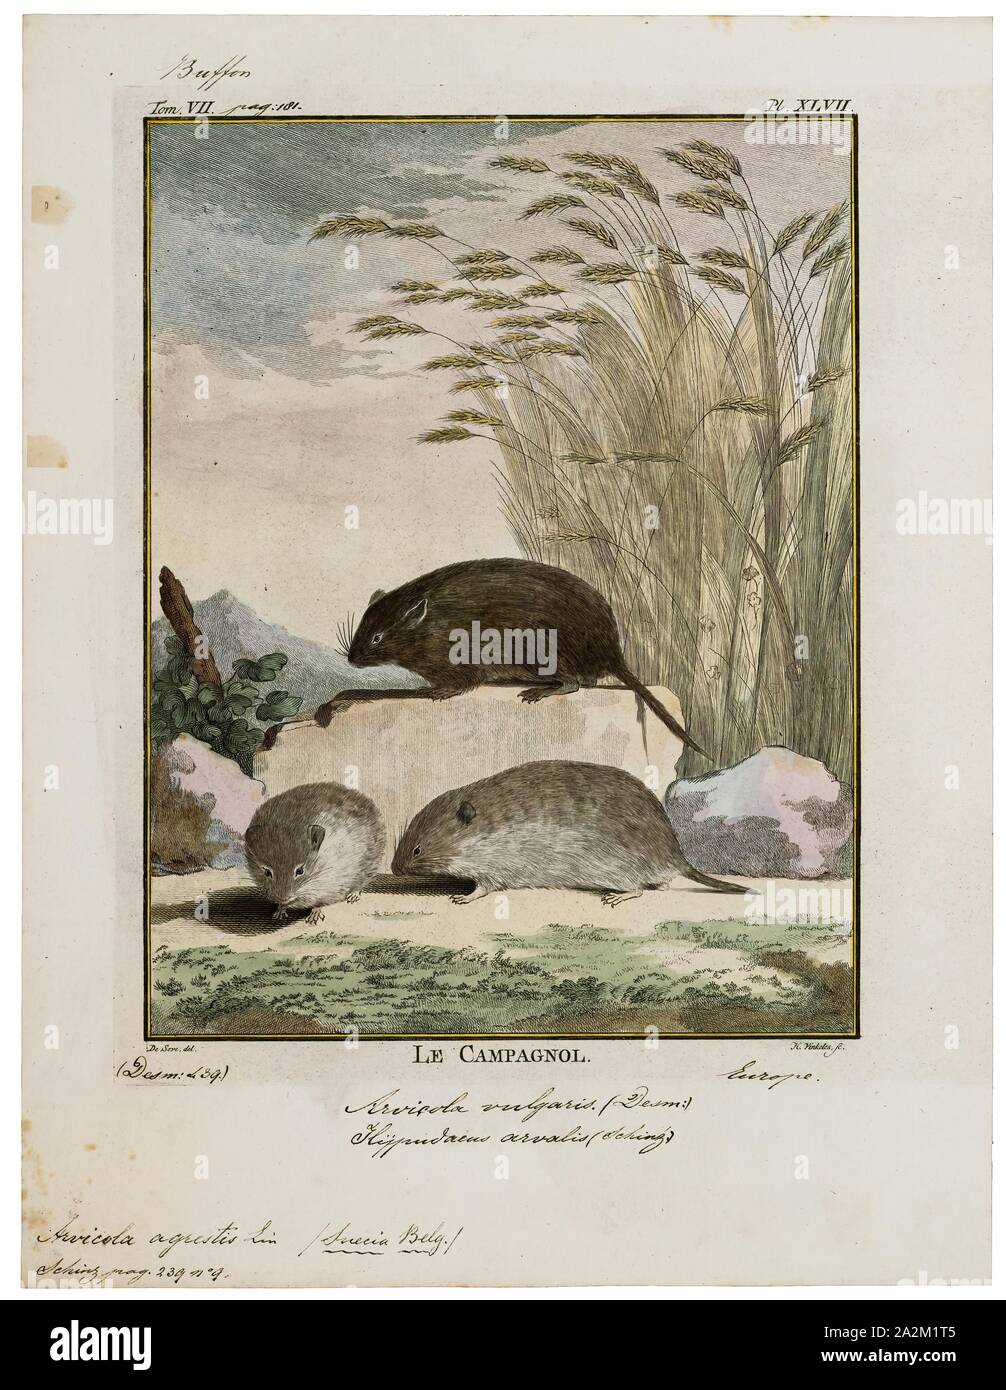 Arvicola agrestis, Print, The water voles are large voles in the genus Arvicola. They are found in both aquatic and dry habitat through Europe and much of northern Asia. A water vole found in Western North America was historically considered a member of this genus, but has been shown to be more closely related to members of the genus Microtus. Head and body lengths are 12–22 cm, tail lengths are 6.5–12.5 cm, and their weights are 70–250 g. The animals may exhibit indeterminate growth. They are thick-furred and have hairy fringes on their feet that improve their swimming ability., 1700-1880 Stock Photo